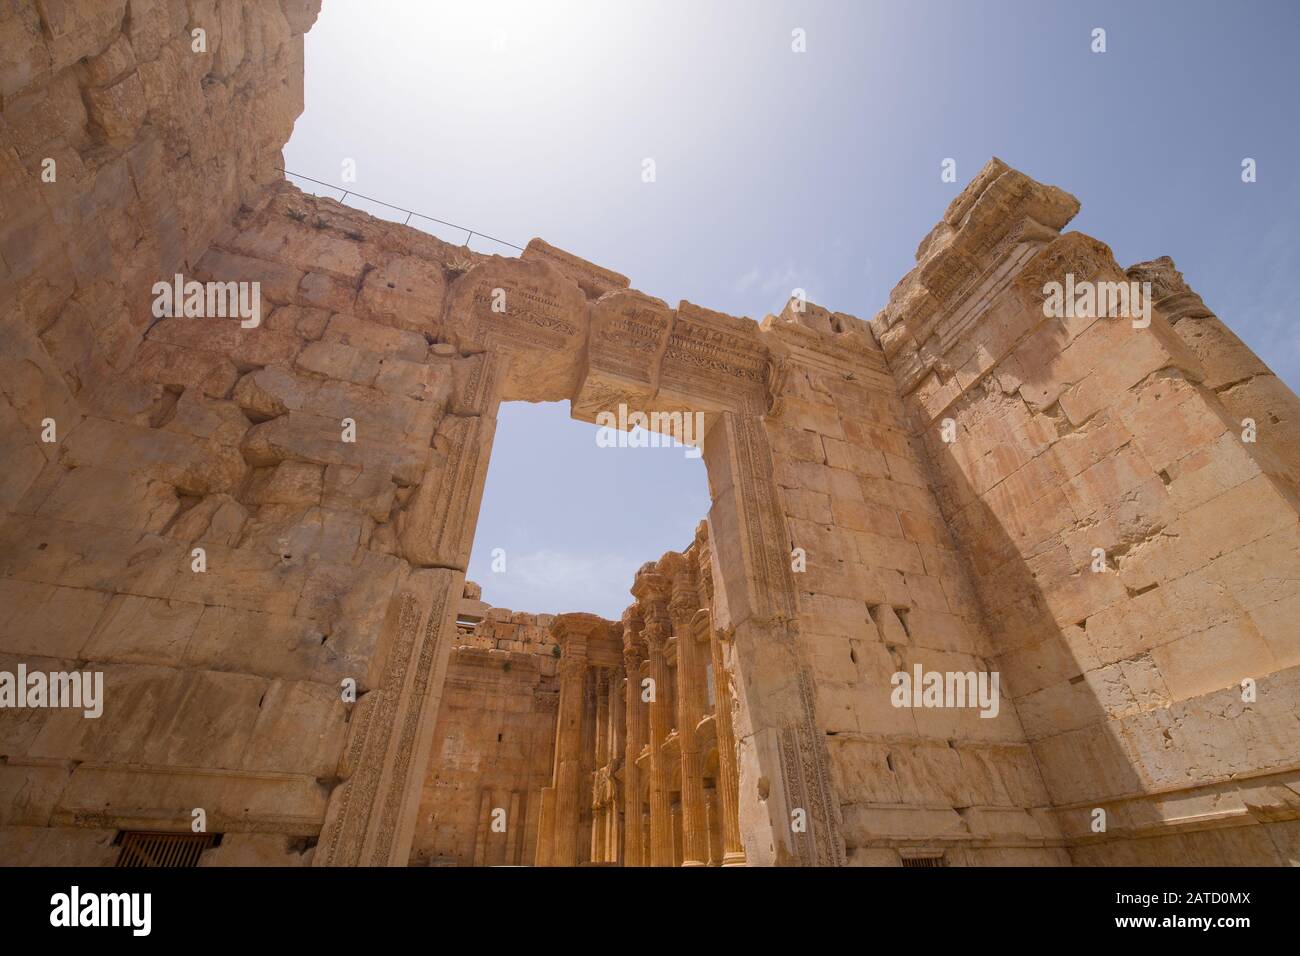 The Temple of Bacchus. The ruins of the Roman city of Heliopolis or Baalbek in the Beqaa Valley. Baalbek, Lebanon - June, 2019 Stock Photo